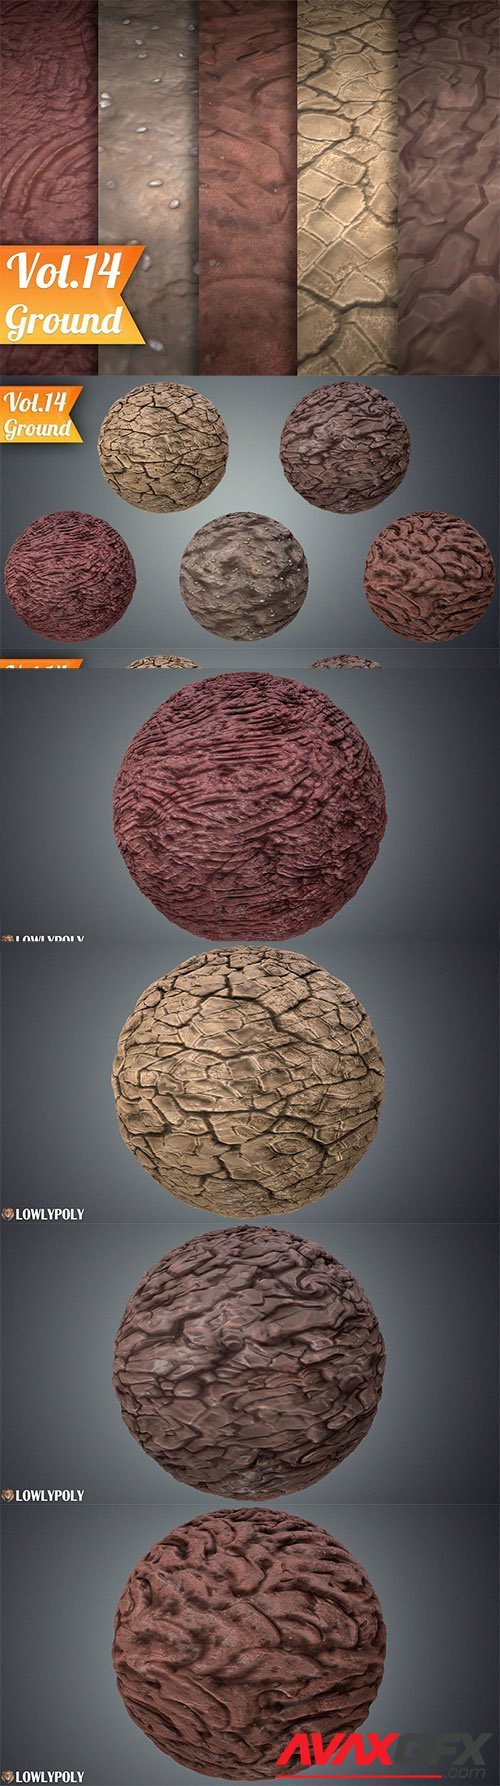 Cgtrader - Stylized Ground Vol 14 - Hand Painted Texture Pack Texture